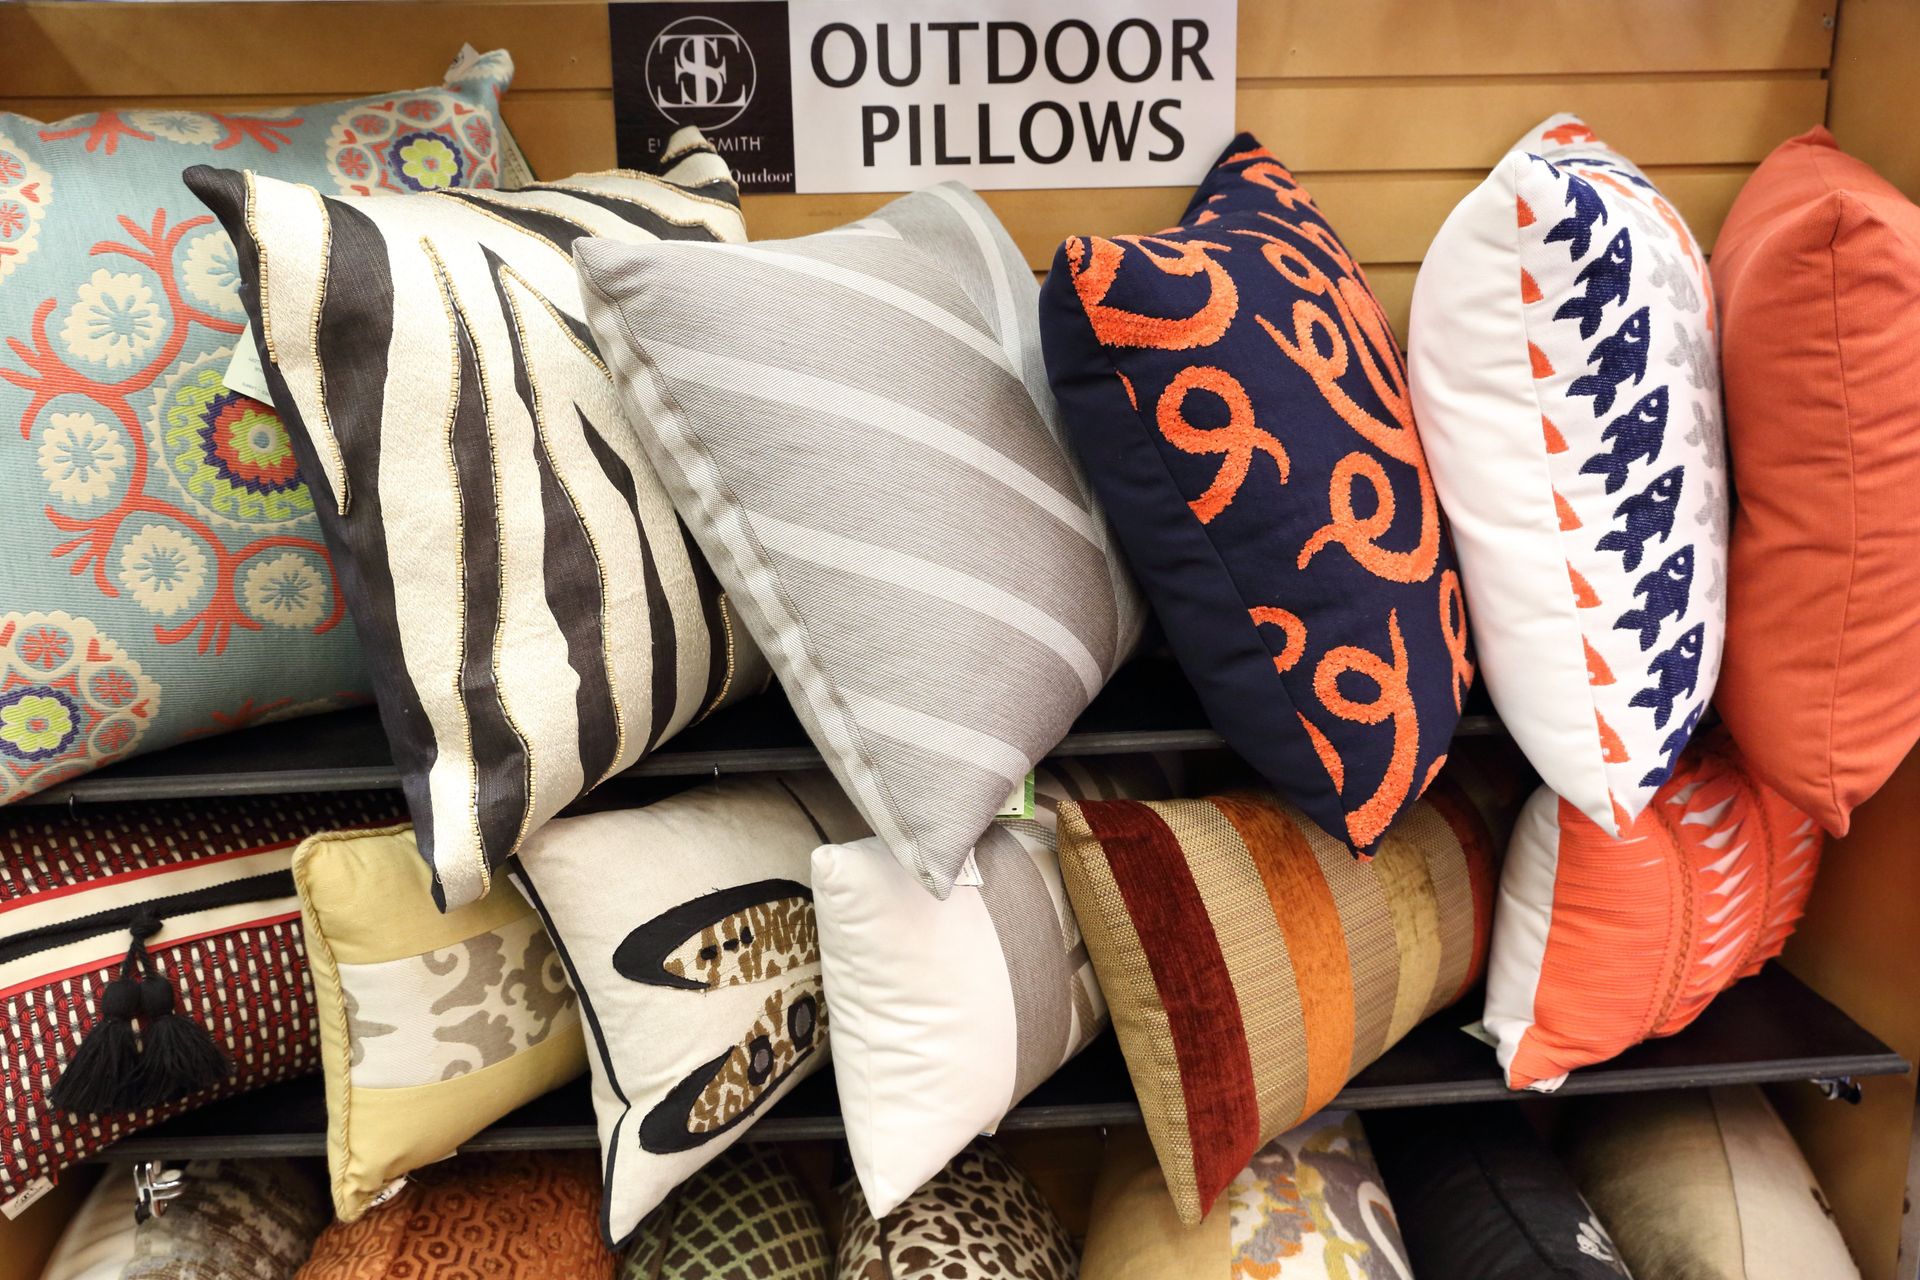 decorative outdoor pillows - The Shade Tree - Home Decor Store in Houston, TX